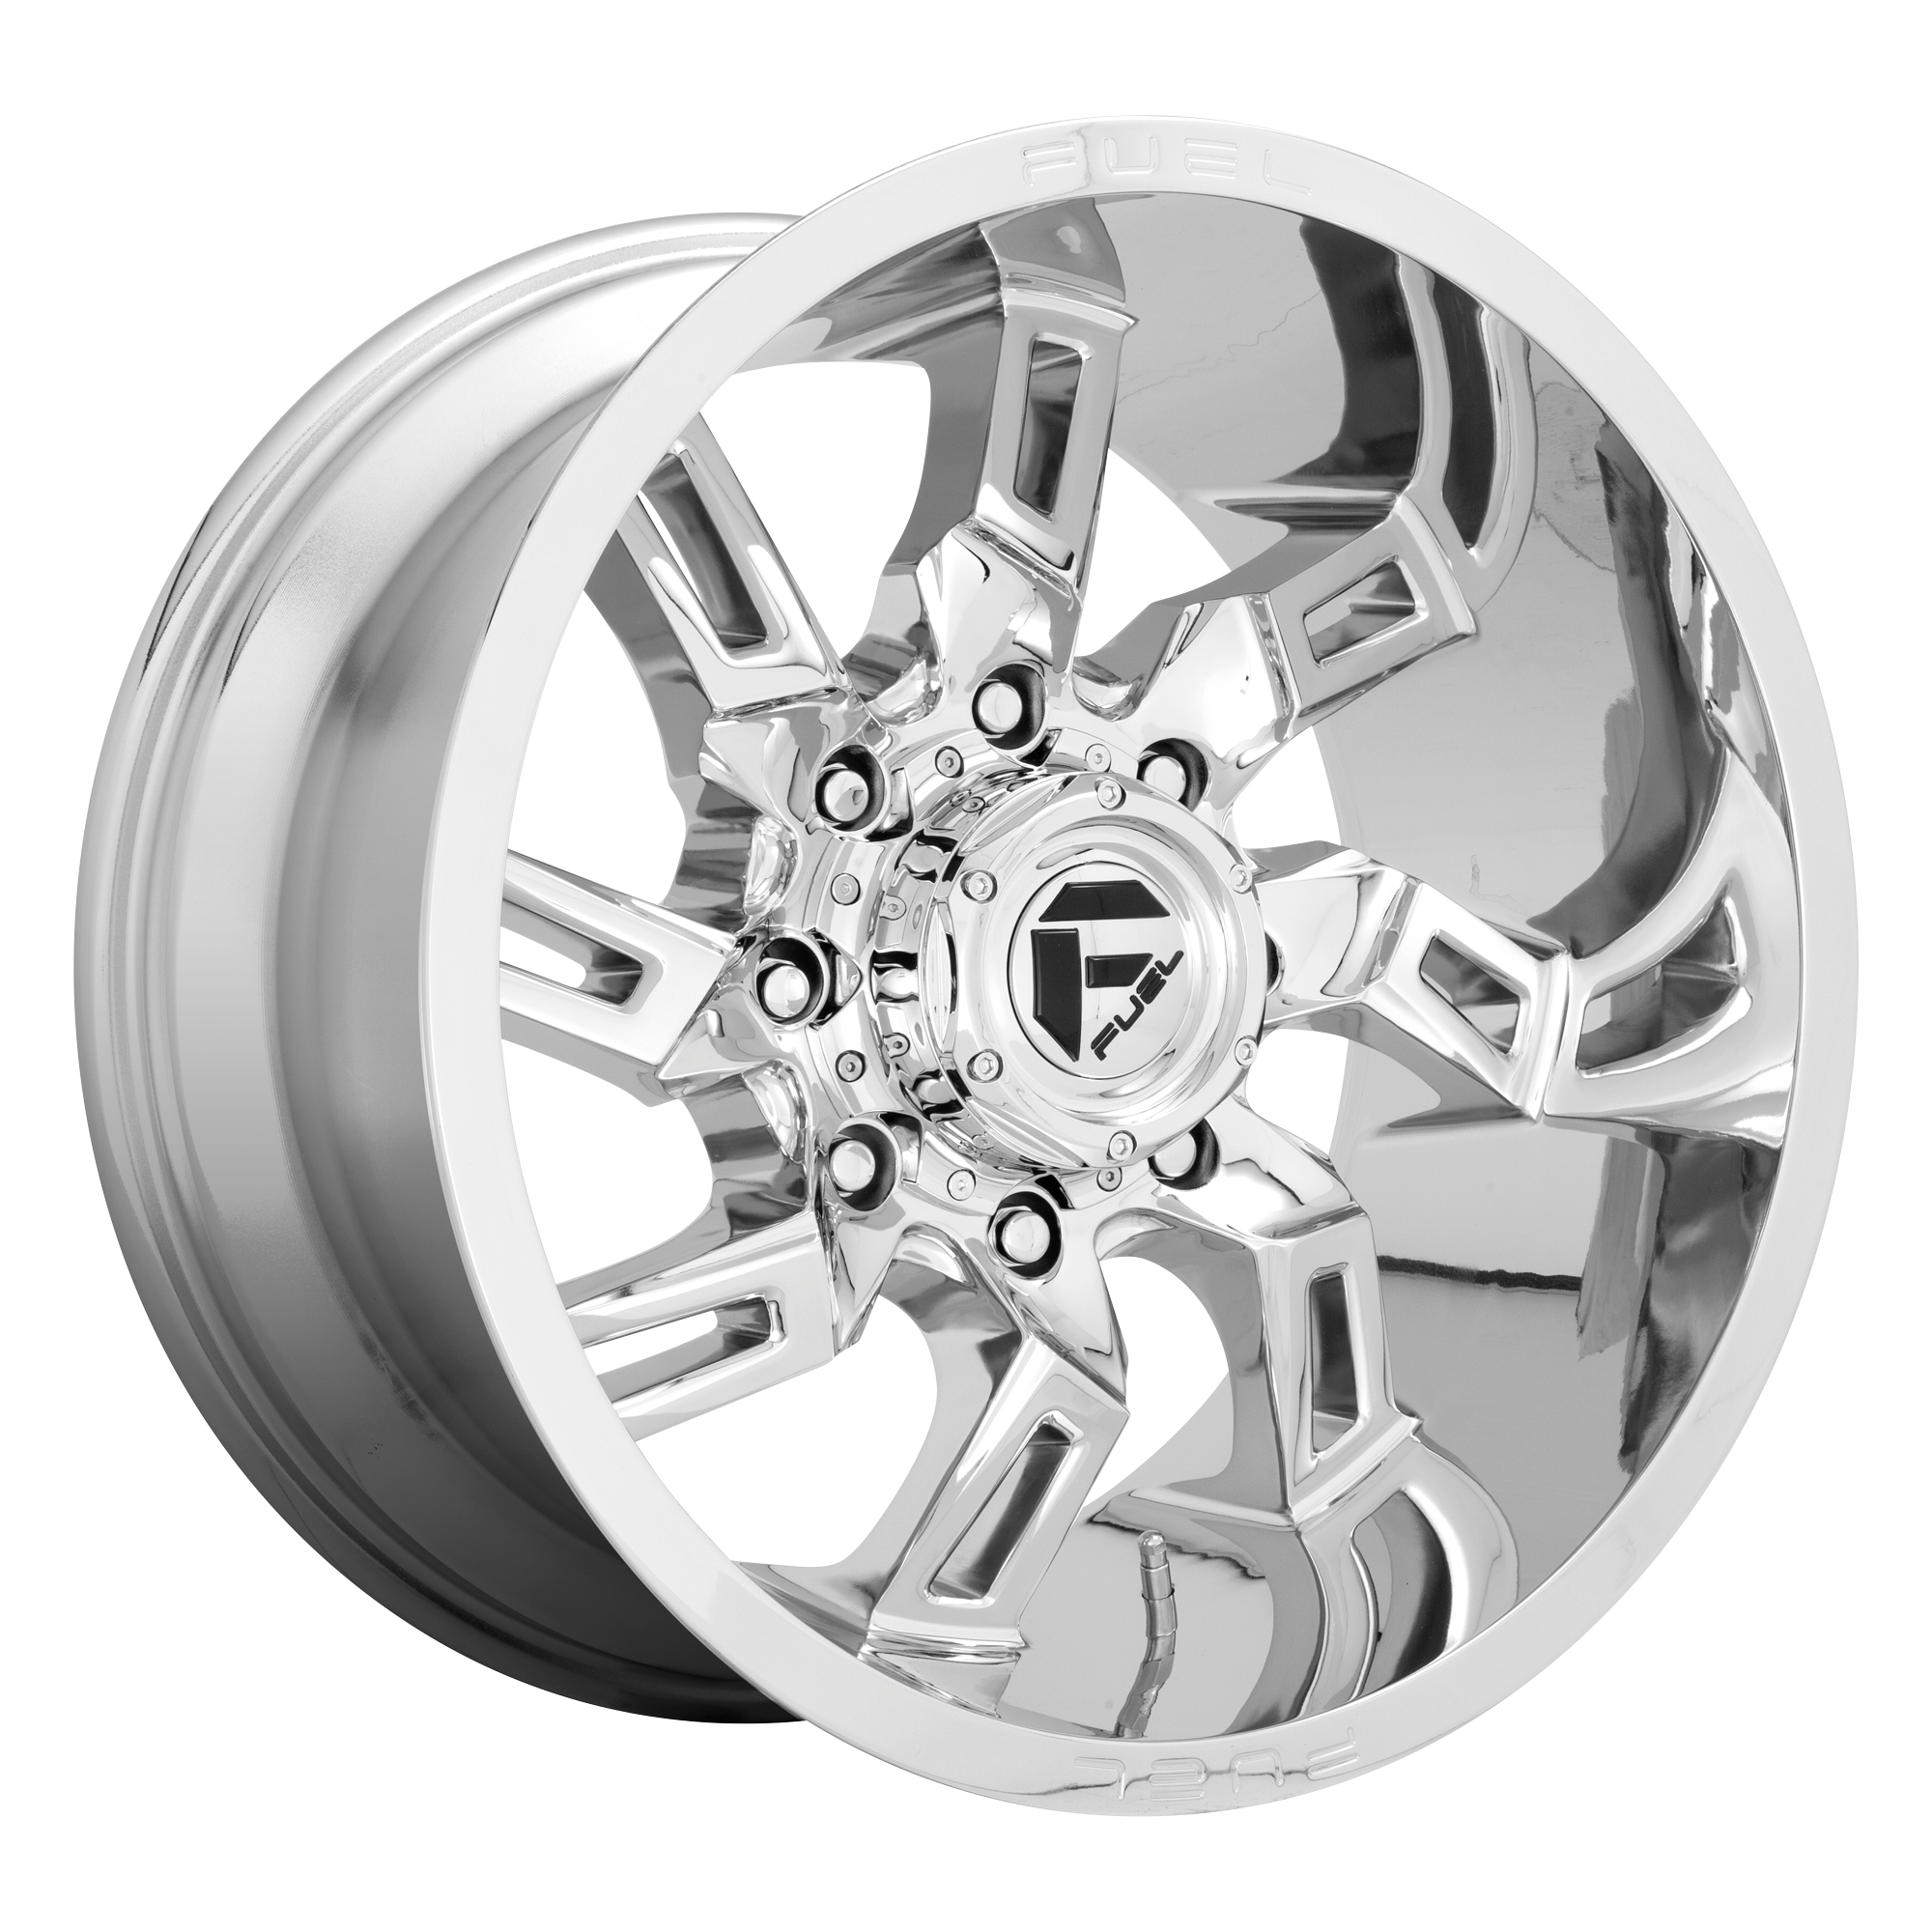 LOCKDOWN 20x10 8x180.00 CHROME (-18 mm) - Tires and Engine Performance